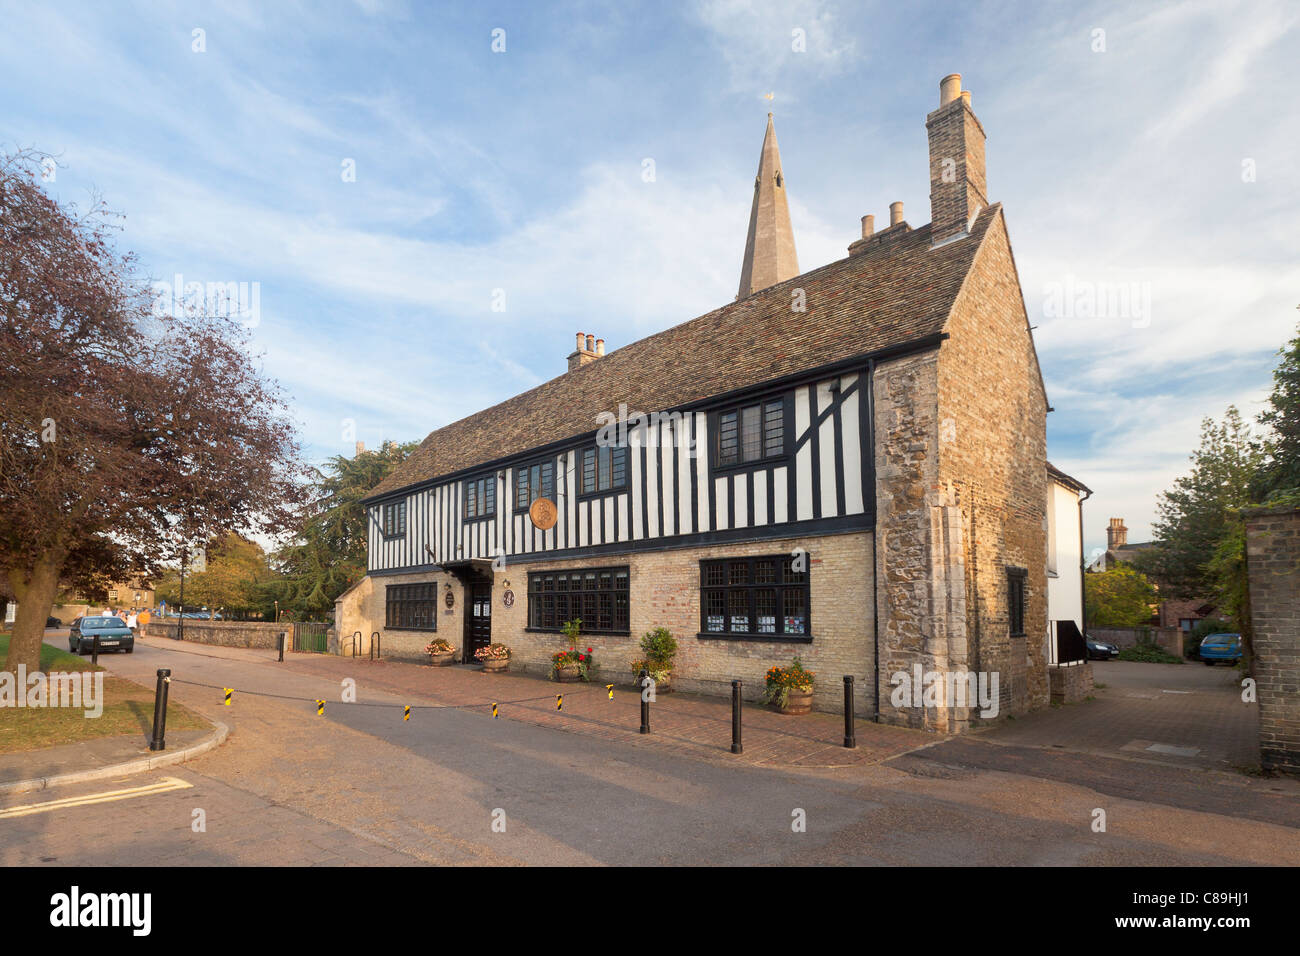 Oliver Cromwell's house in Ely, UK Stock Photo